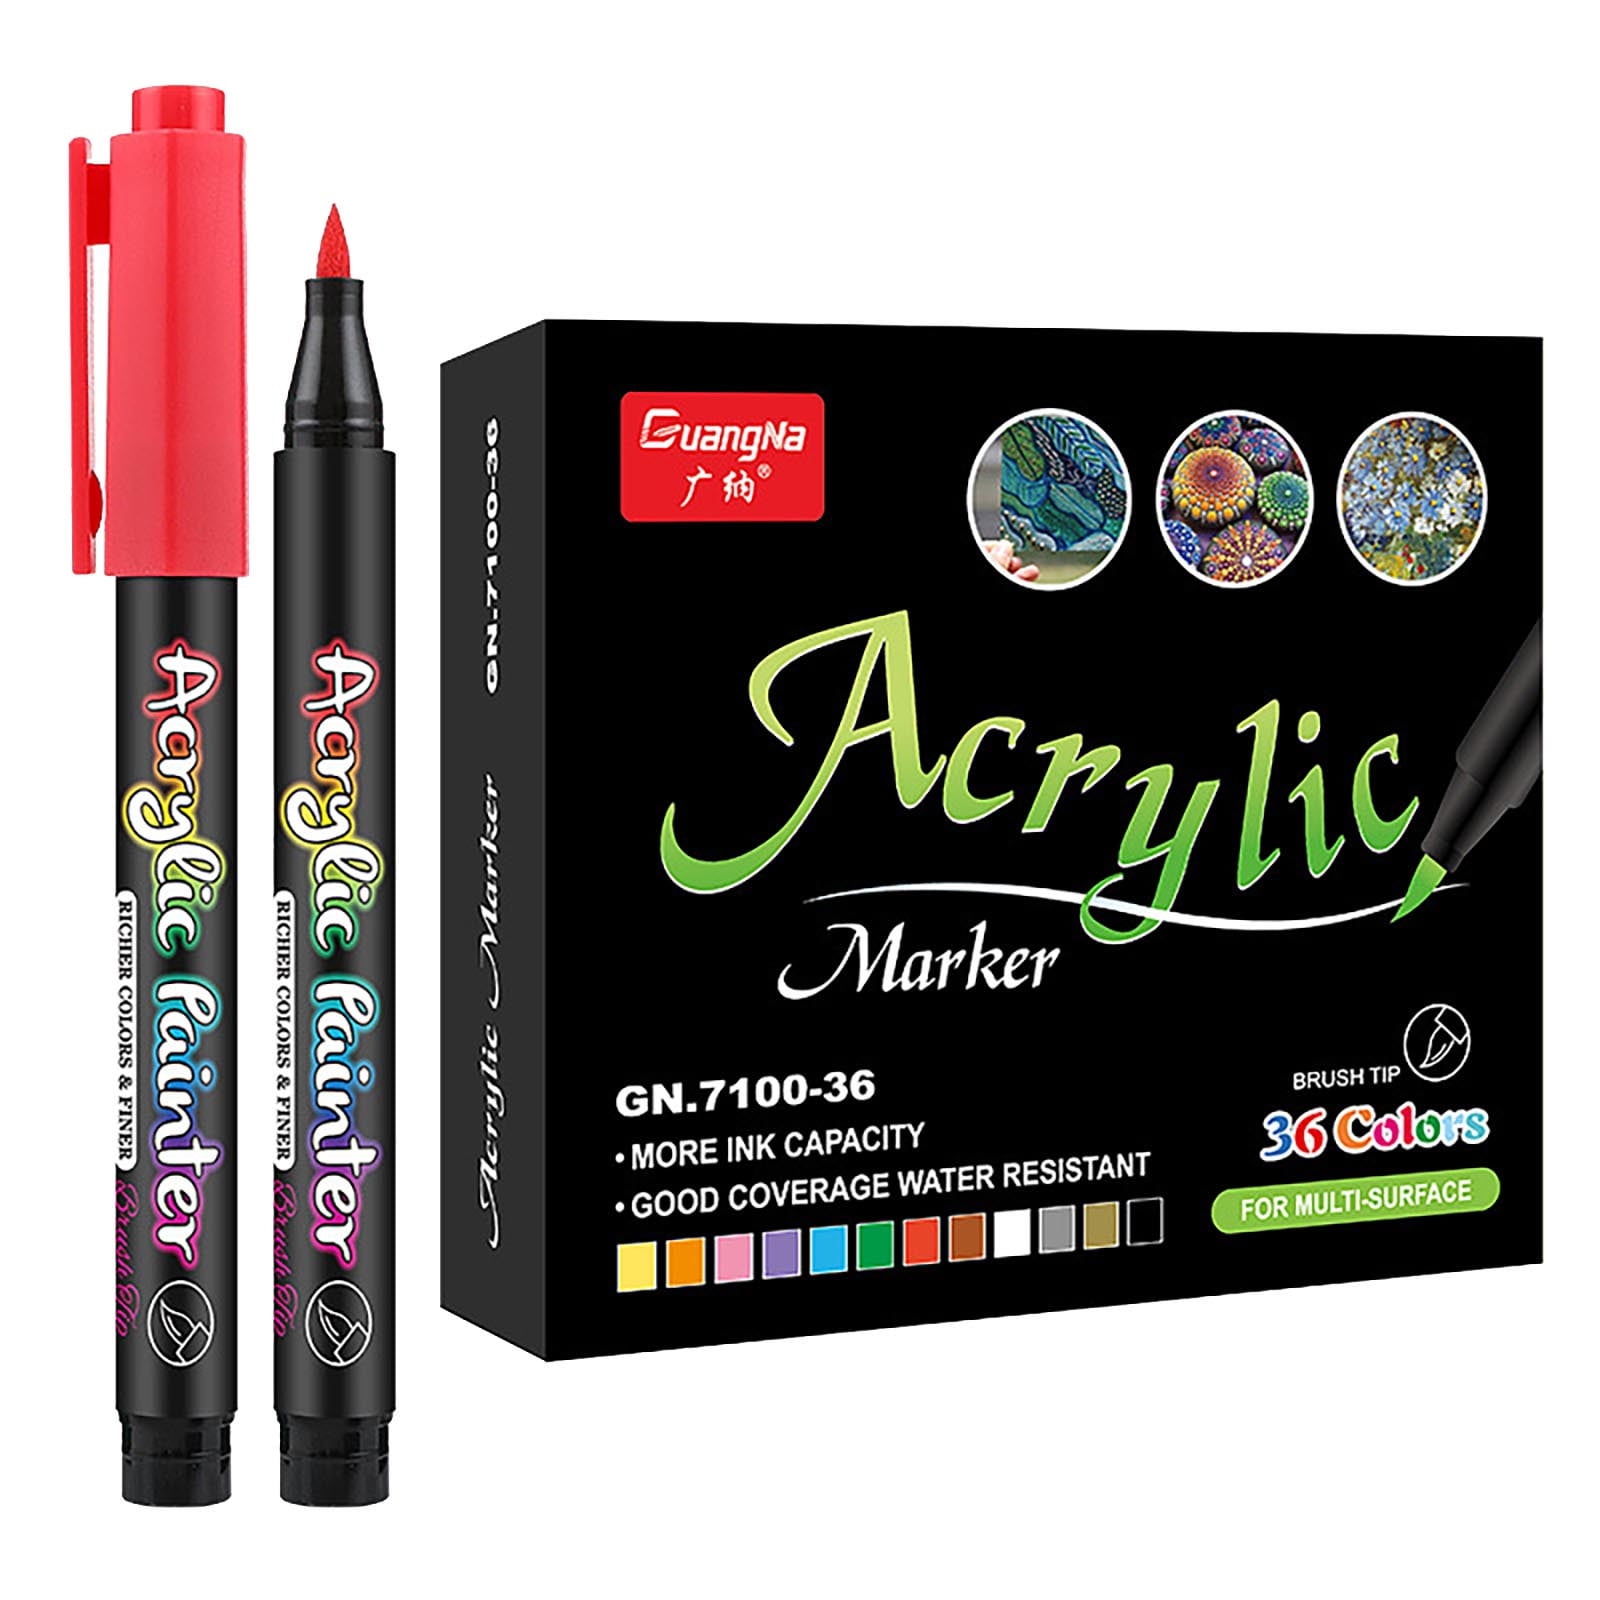 Crafty Croc® 16-Count Water-Based Acrylic Paint Markers (2-Pack) 